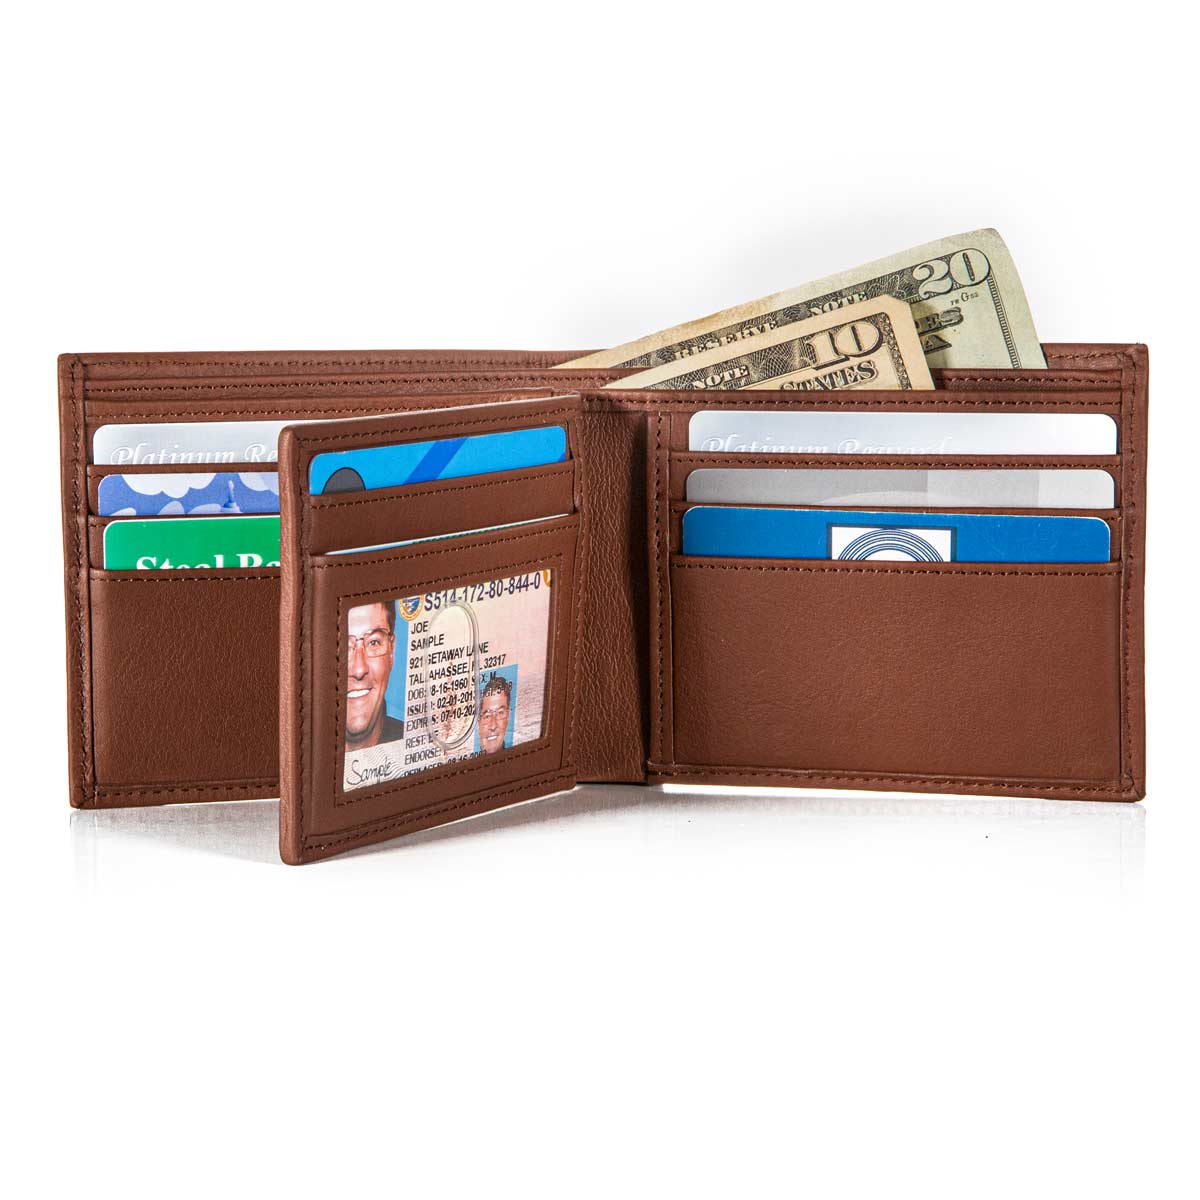 Keep it Organized: Personalized Men's Wallet I YOUR GIFT STUDIO